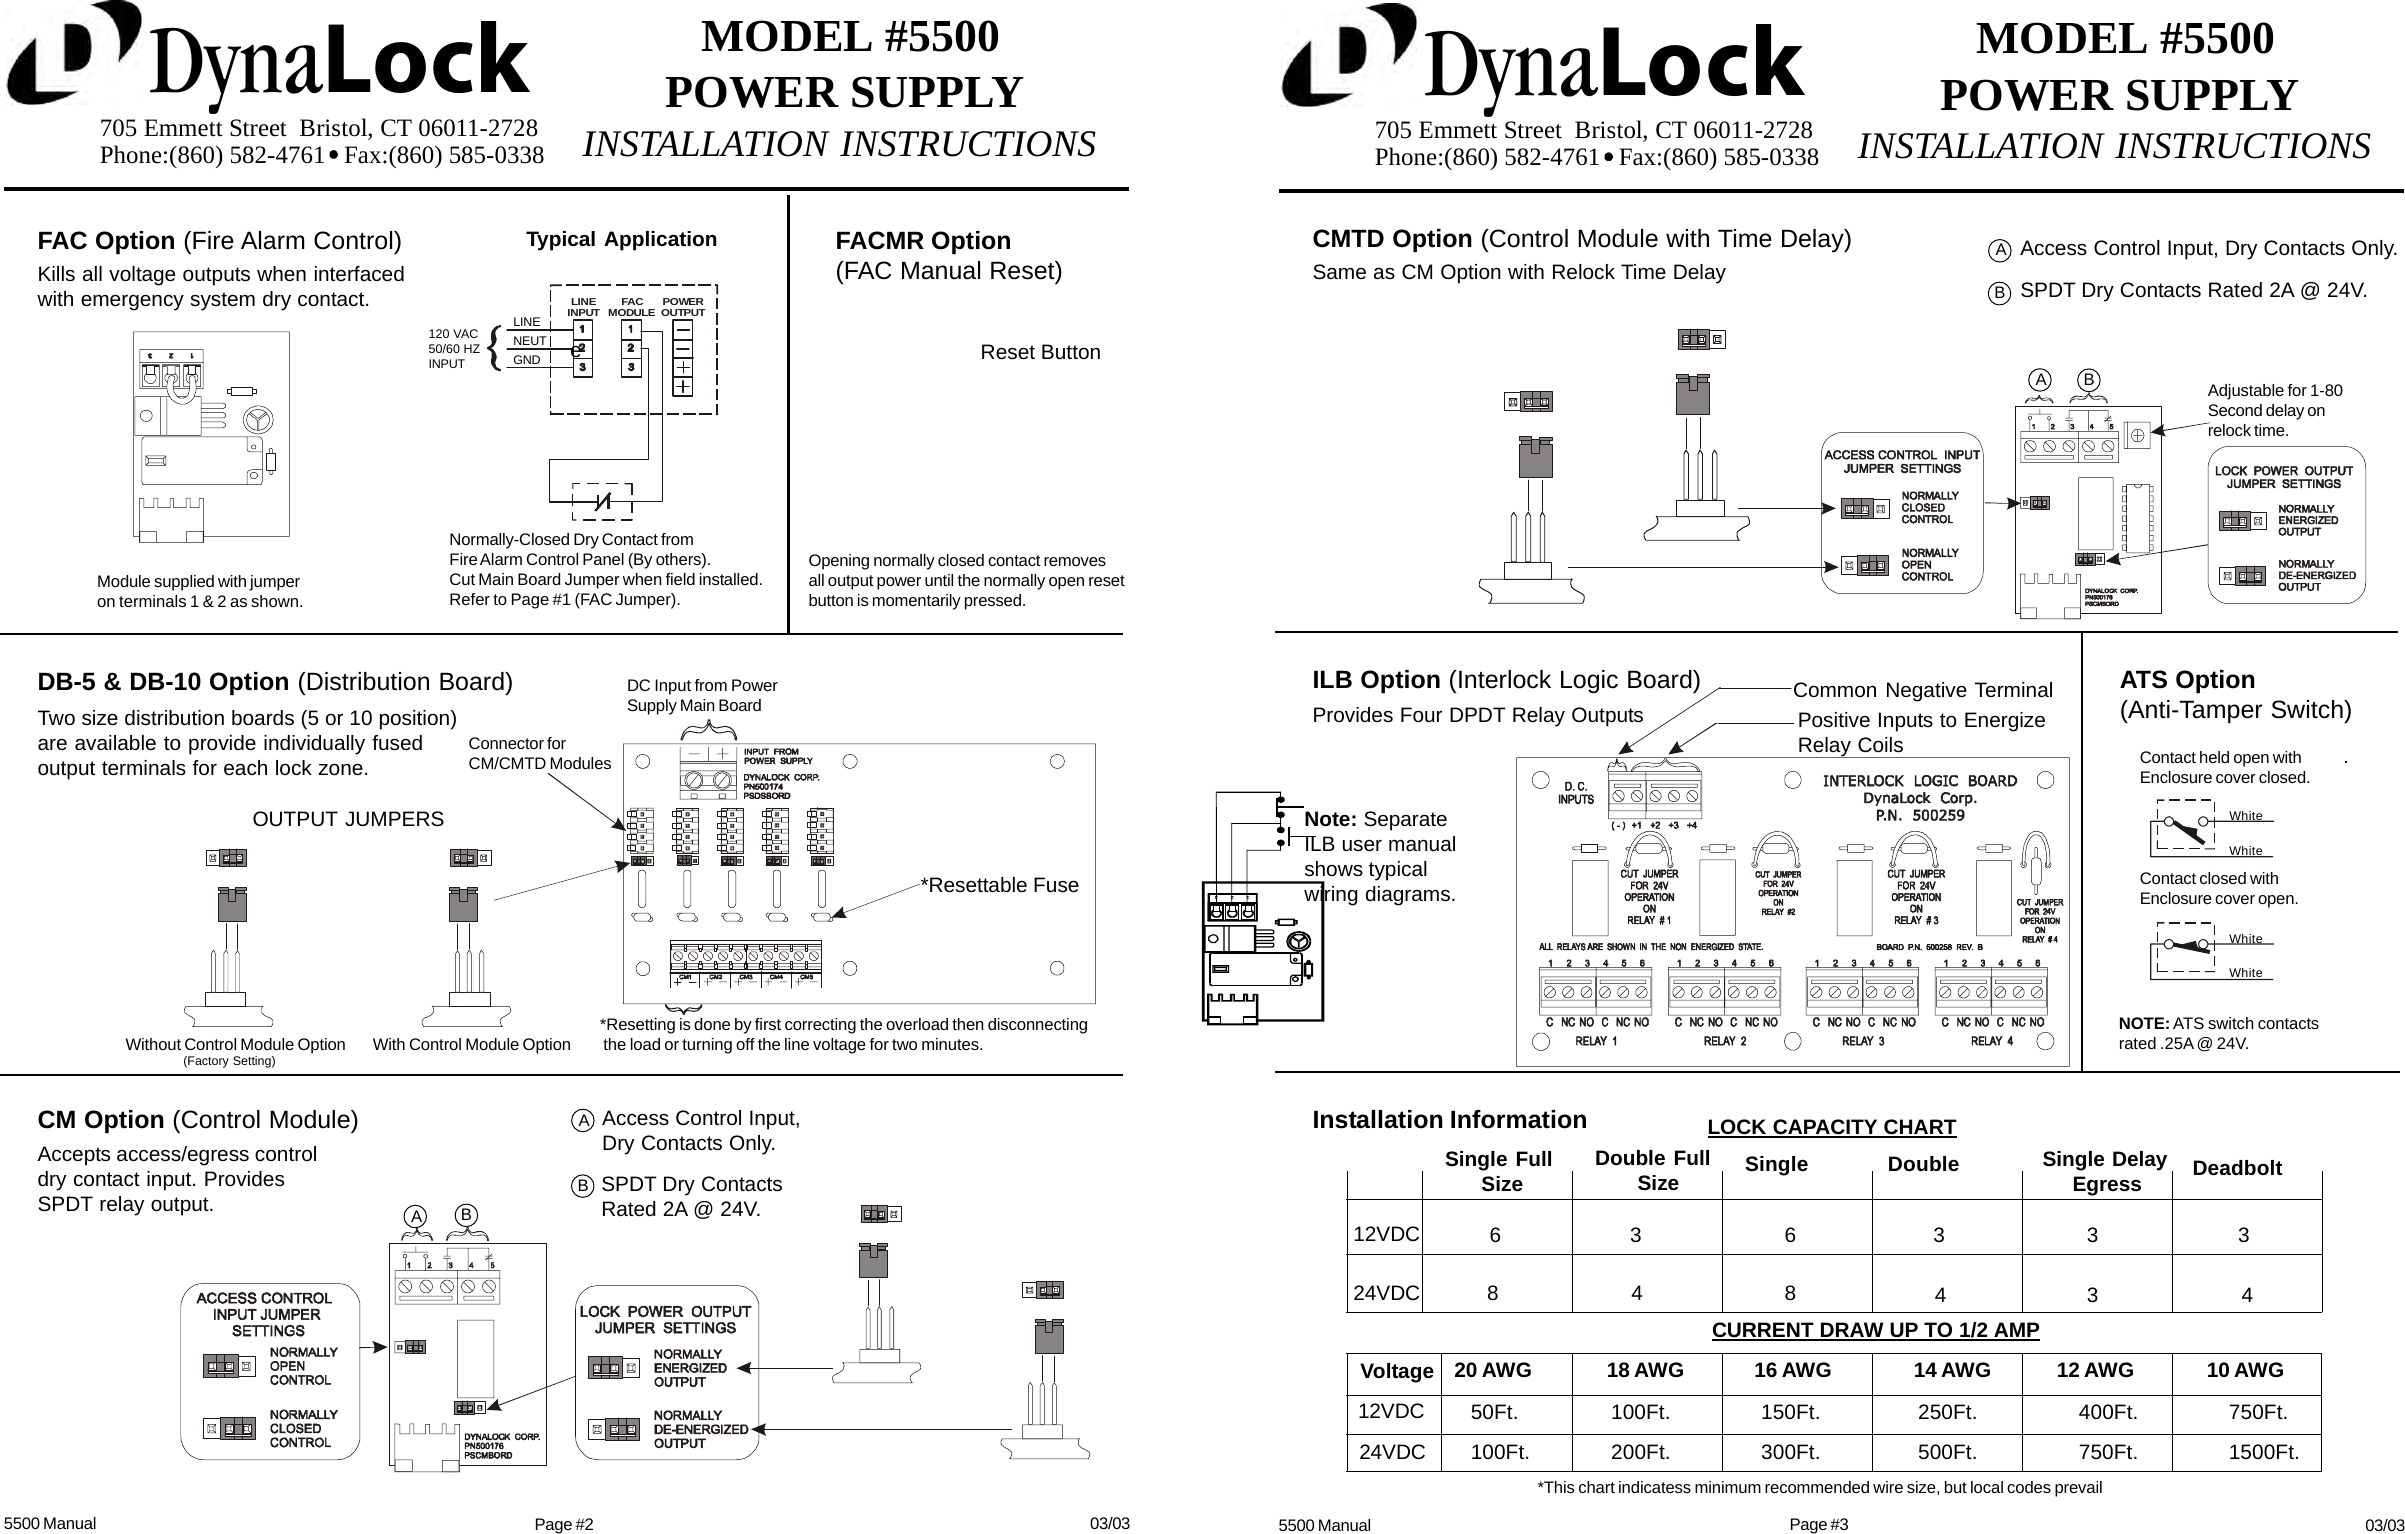 Page 3 of 4 - DynaLock E-Binder 5500 Series Installation Instructions 5500IN